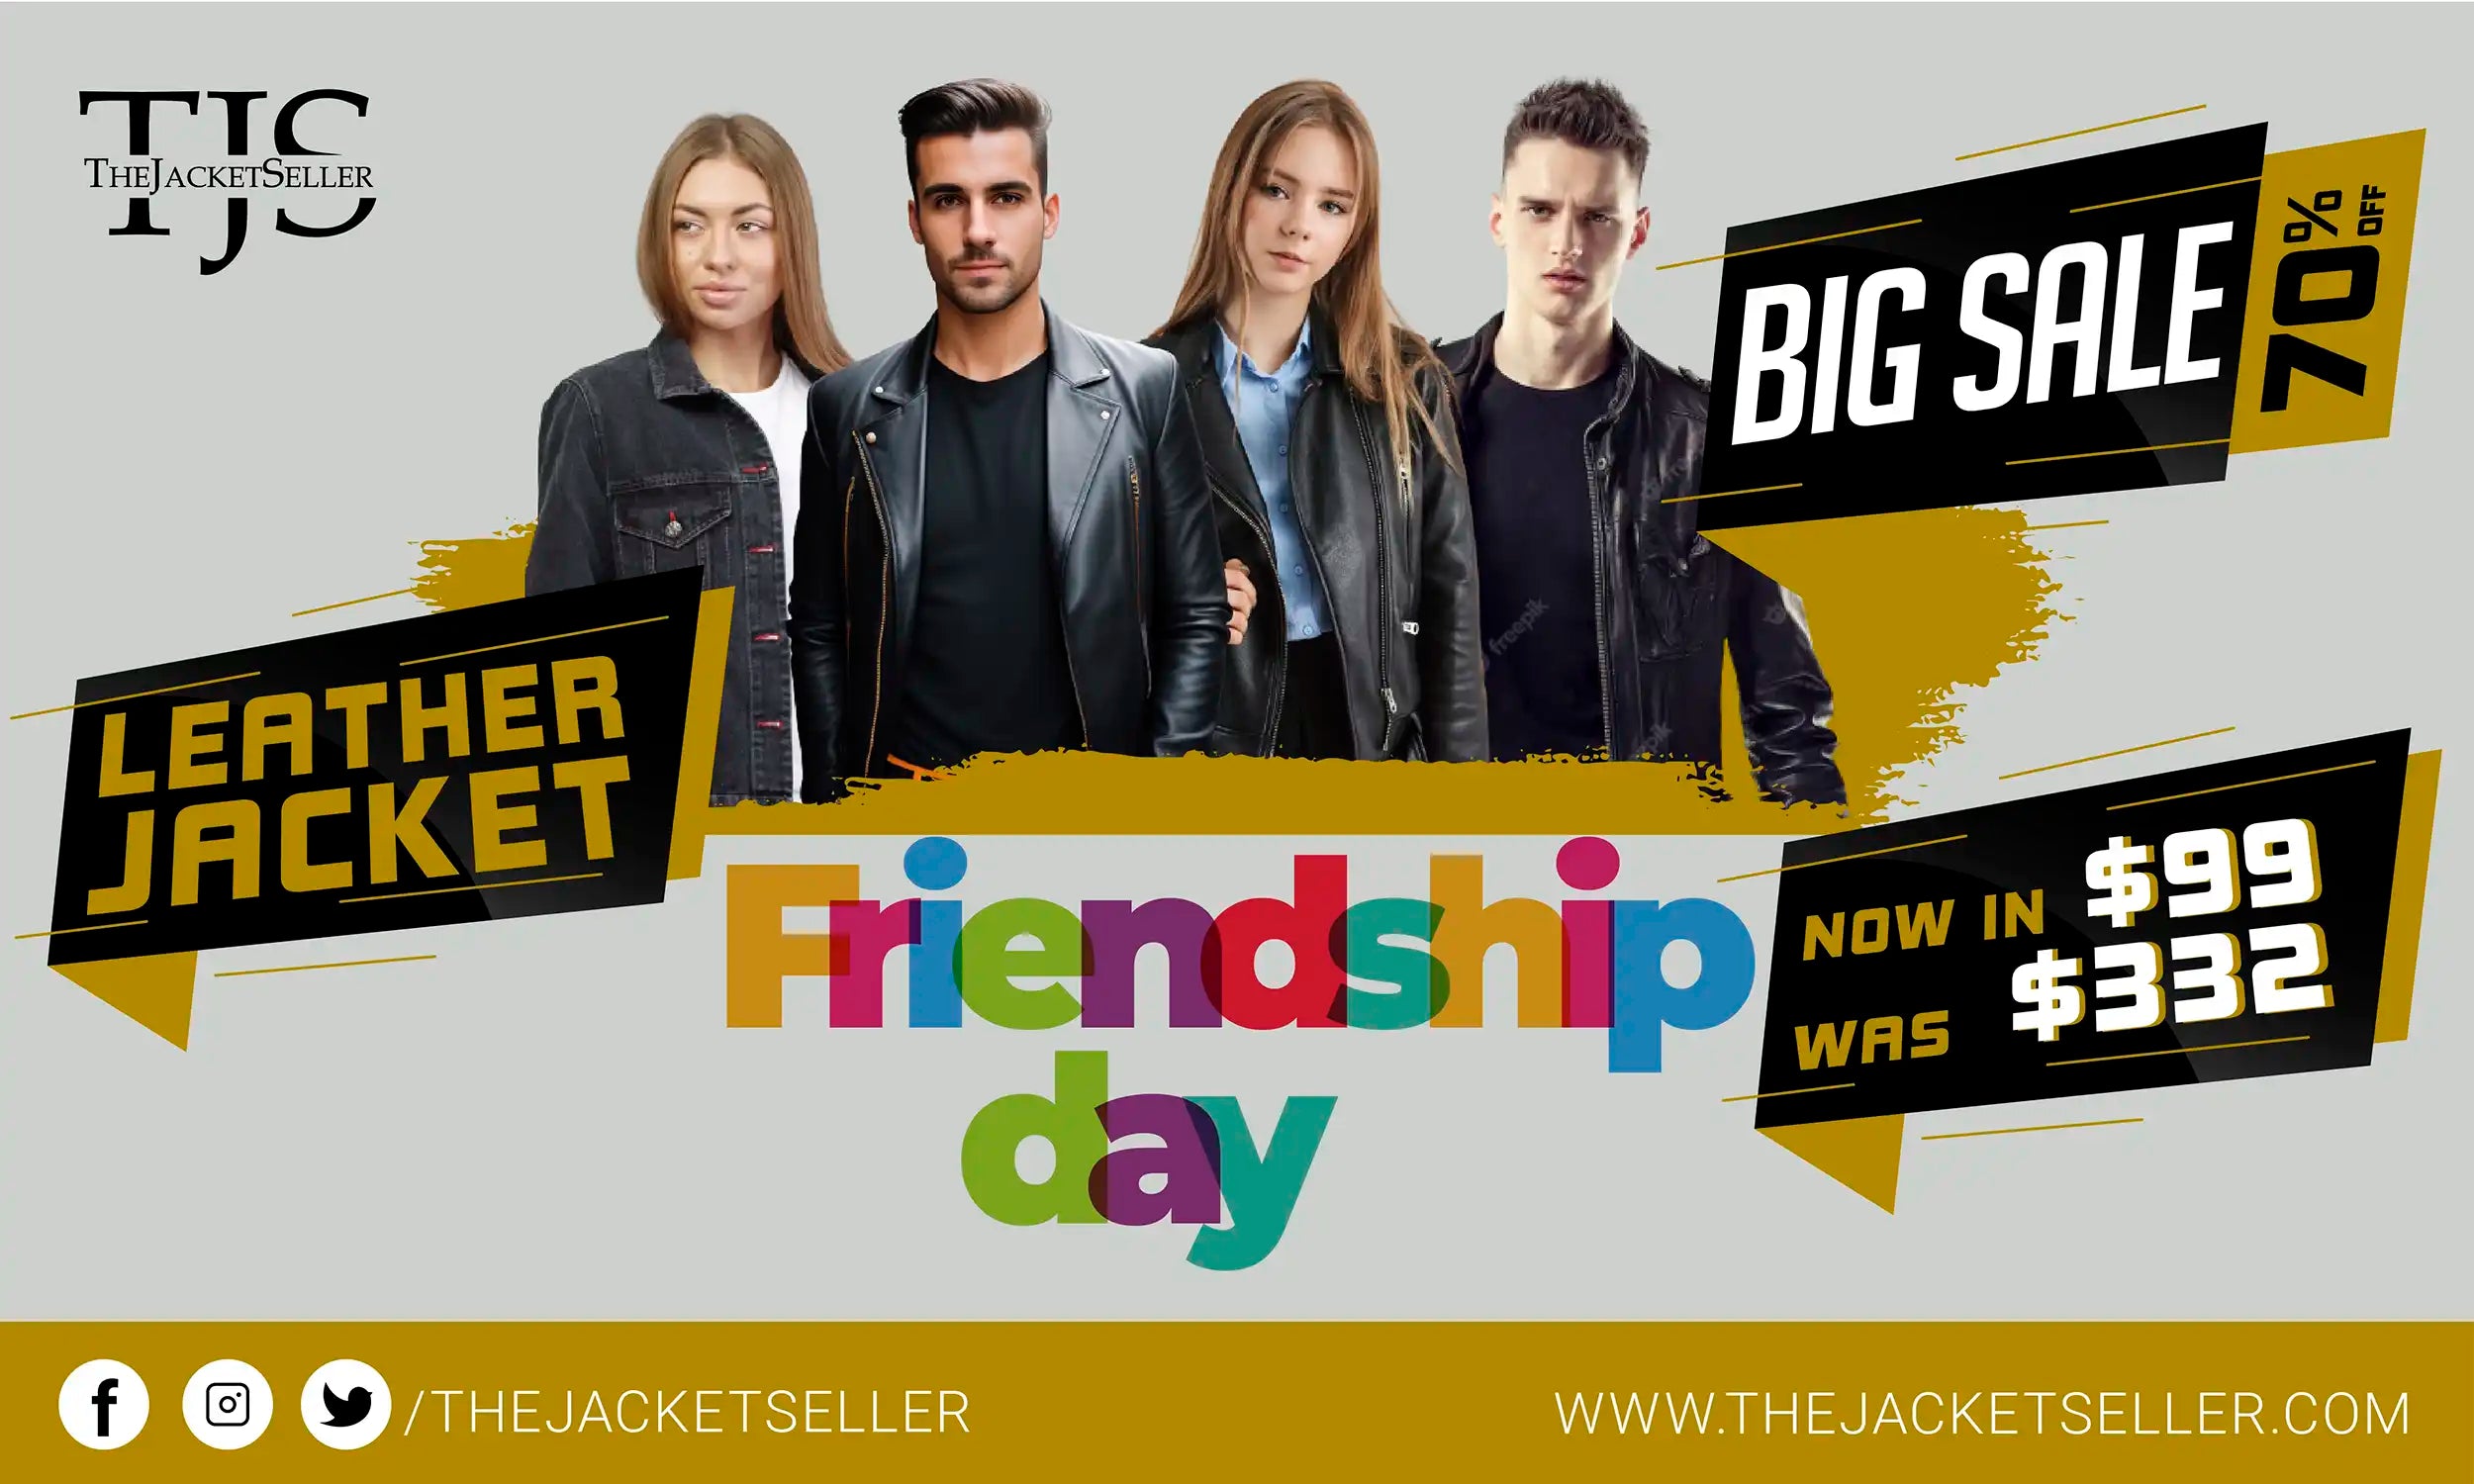 Friendship Day Sale - The Jacket Seller